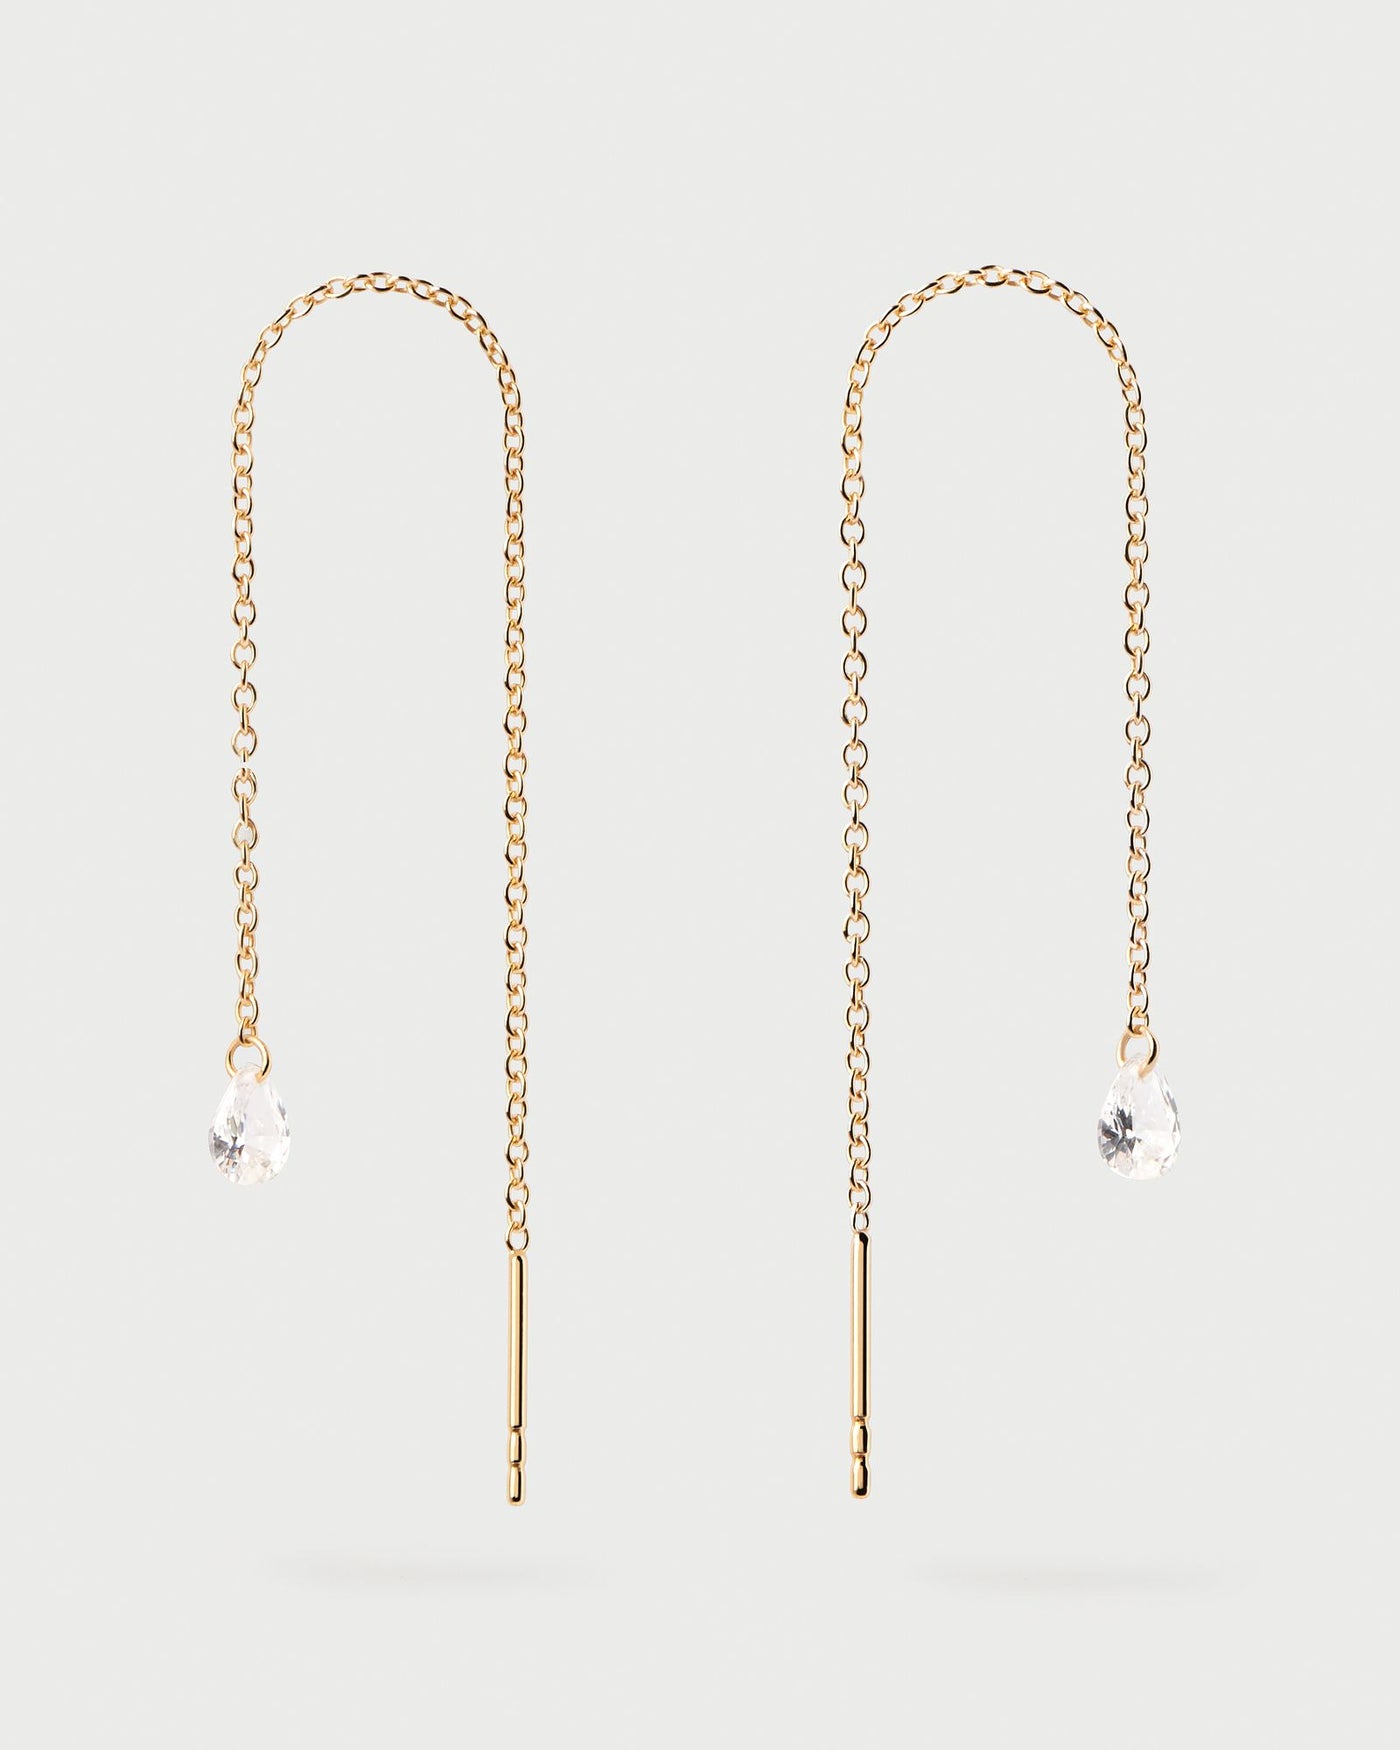 2024 Selection | Waterfall drop Earrings. Long delicate earrings in gold-plated silver with drop zirconia pendant. Get the latest arrival from PDPAOLA. Place your order safely and get this Best Seller. Free Shipping.